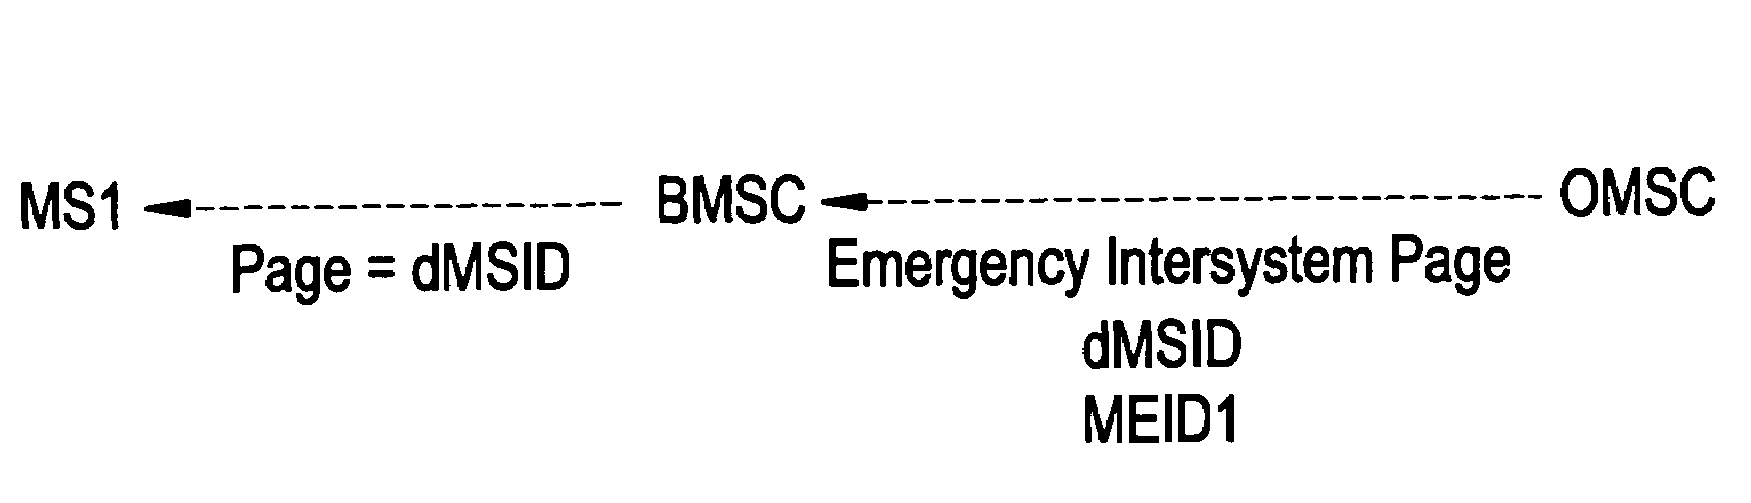 Emergency intersystem paging for emergency call back